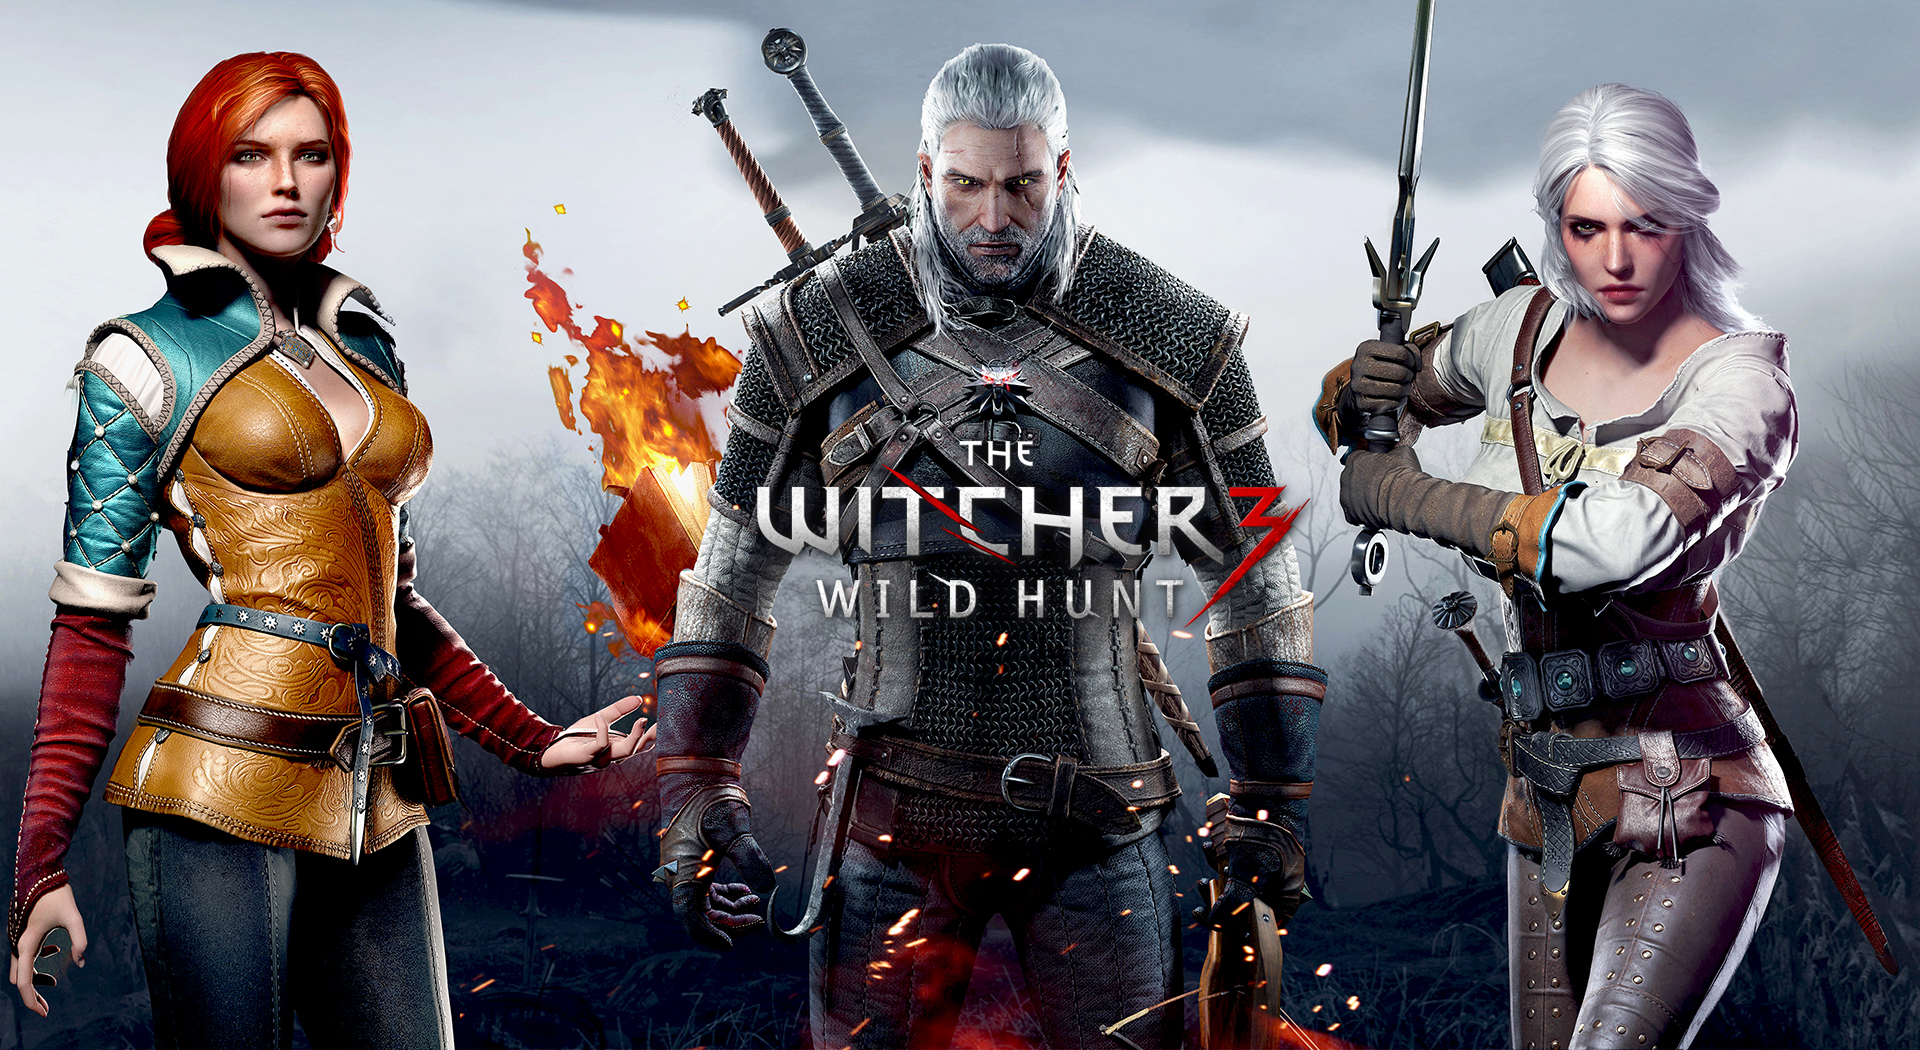  the Collection The Witcher Video Game The Witcher 3 Wild Hunt 551471 1920x1050